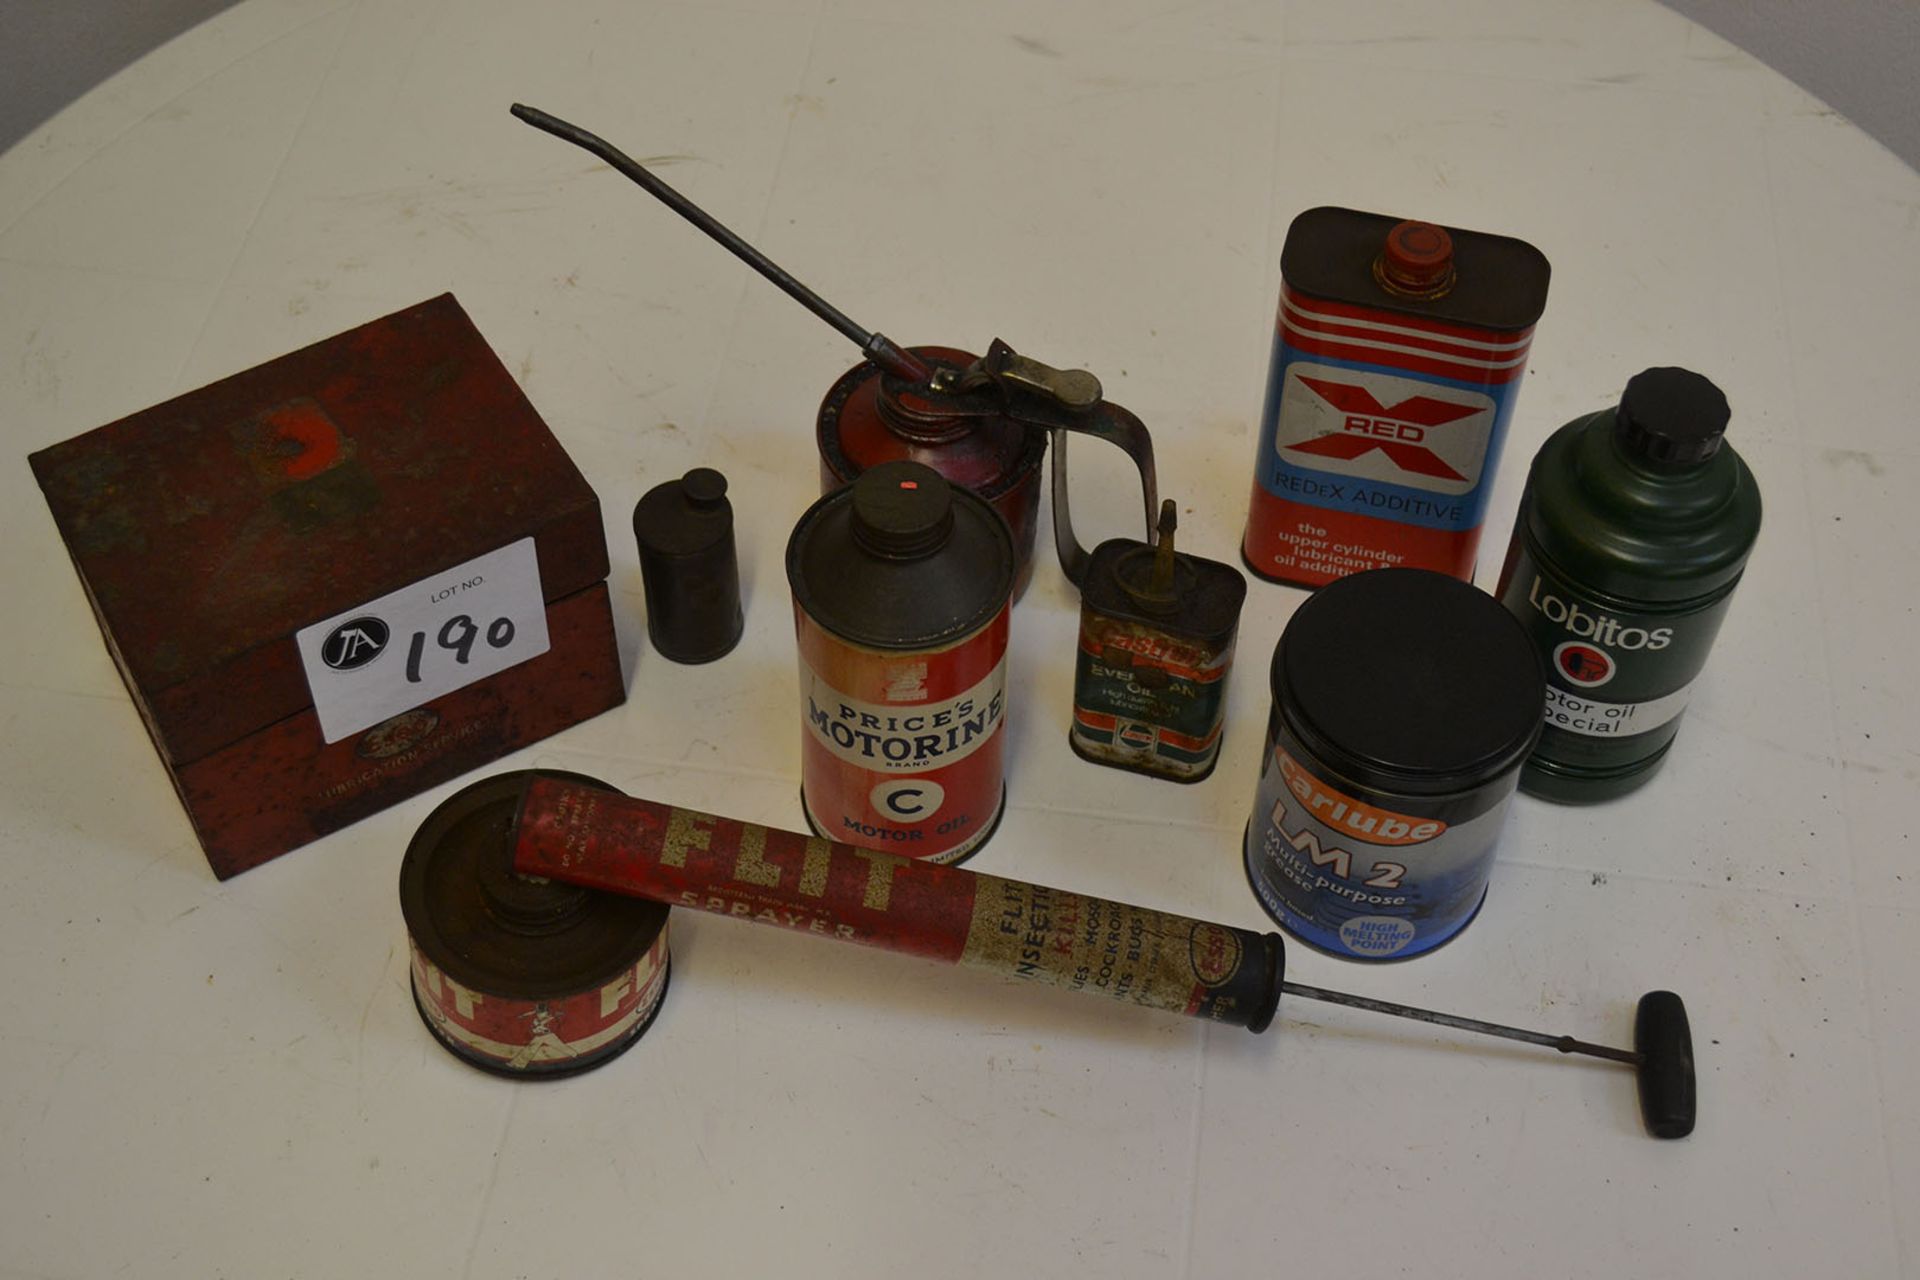 Flit spray, Esso box, cans and oil can